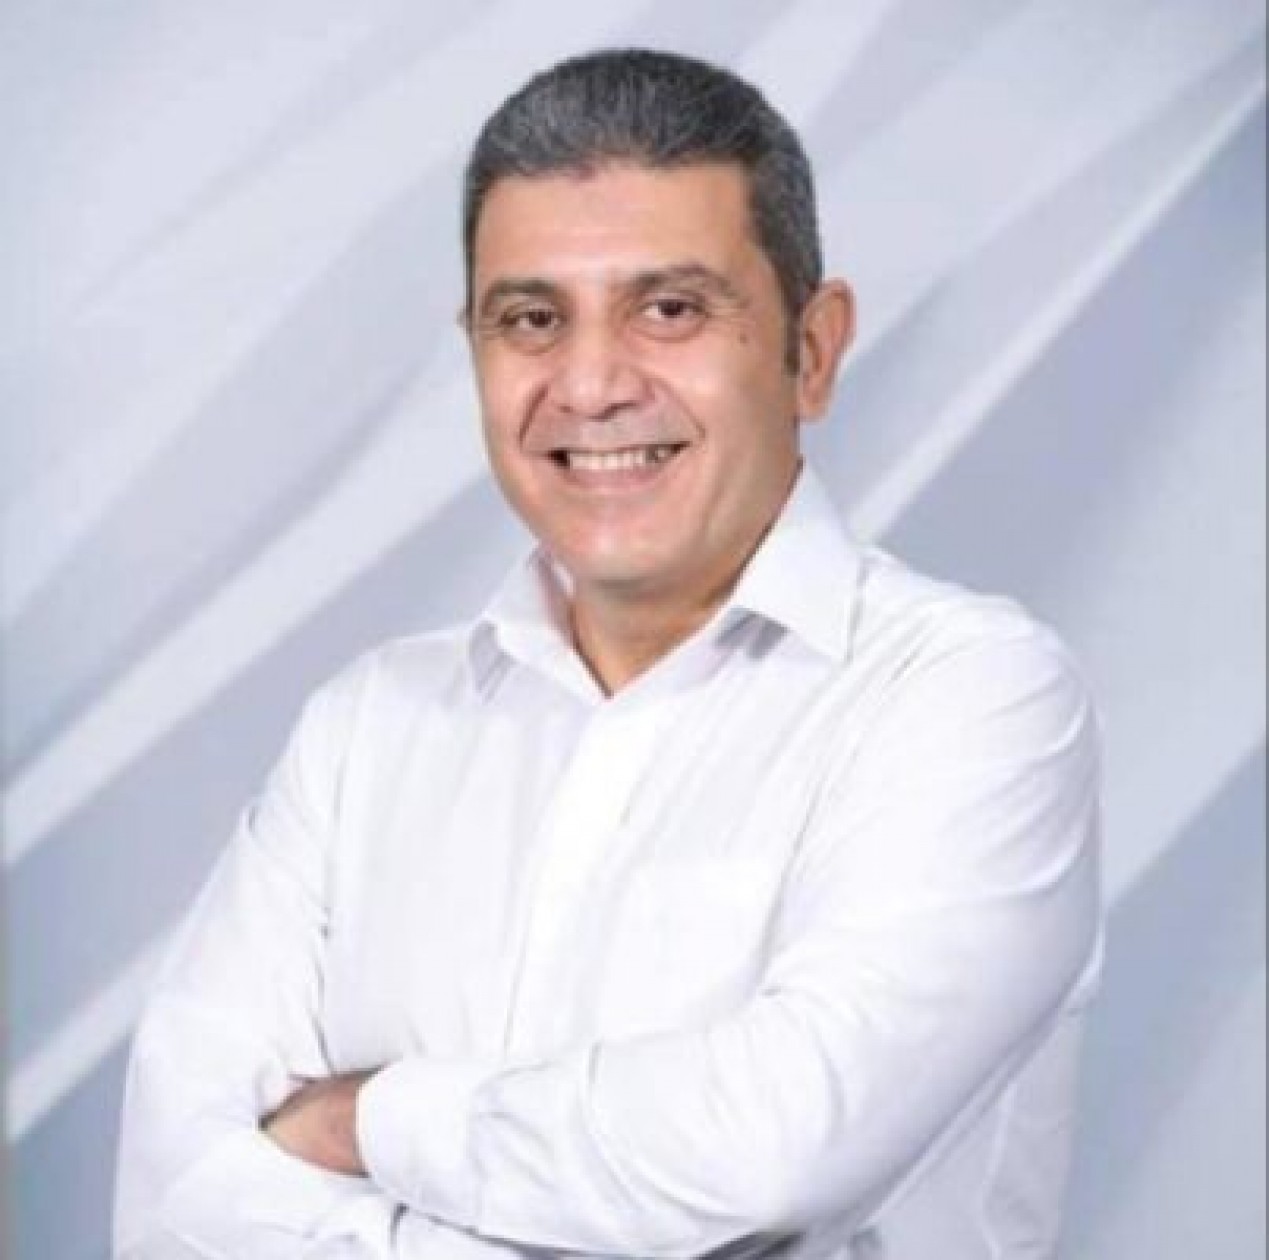 Ahmed El-Saeed is now the Managing Director of Powerline!